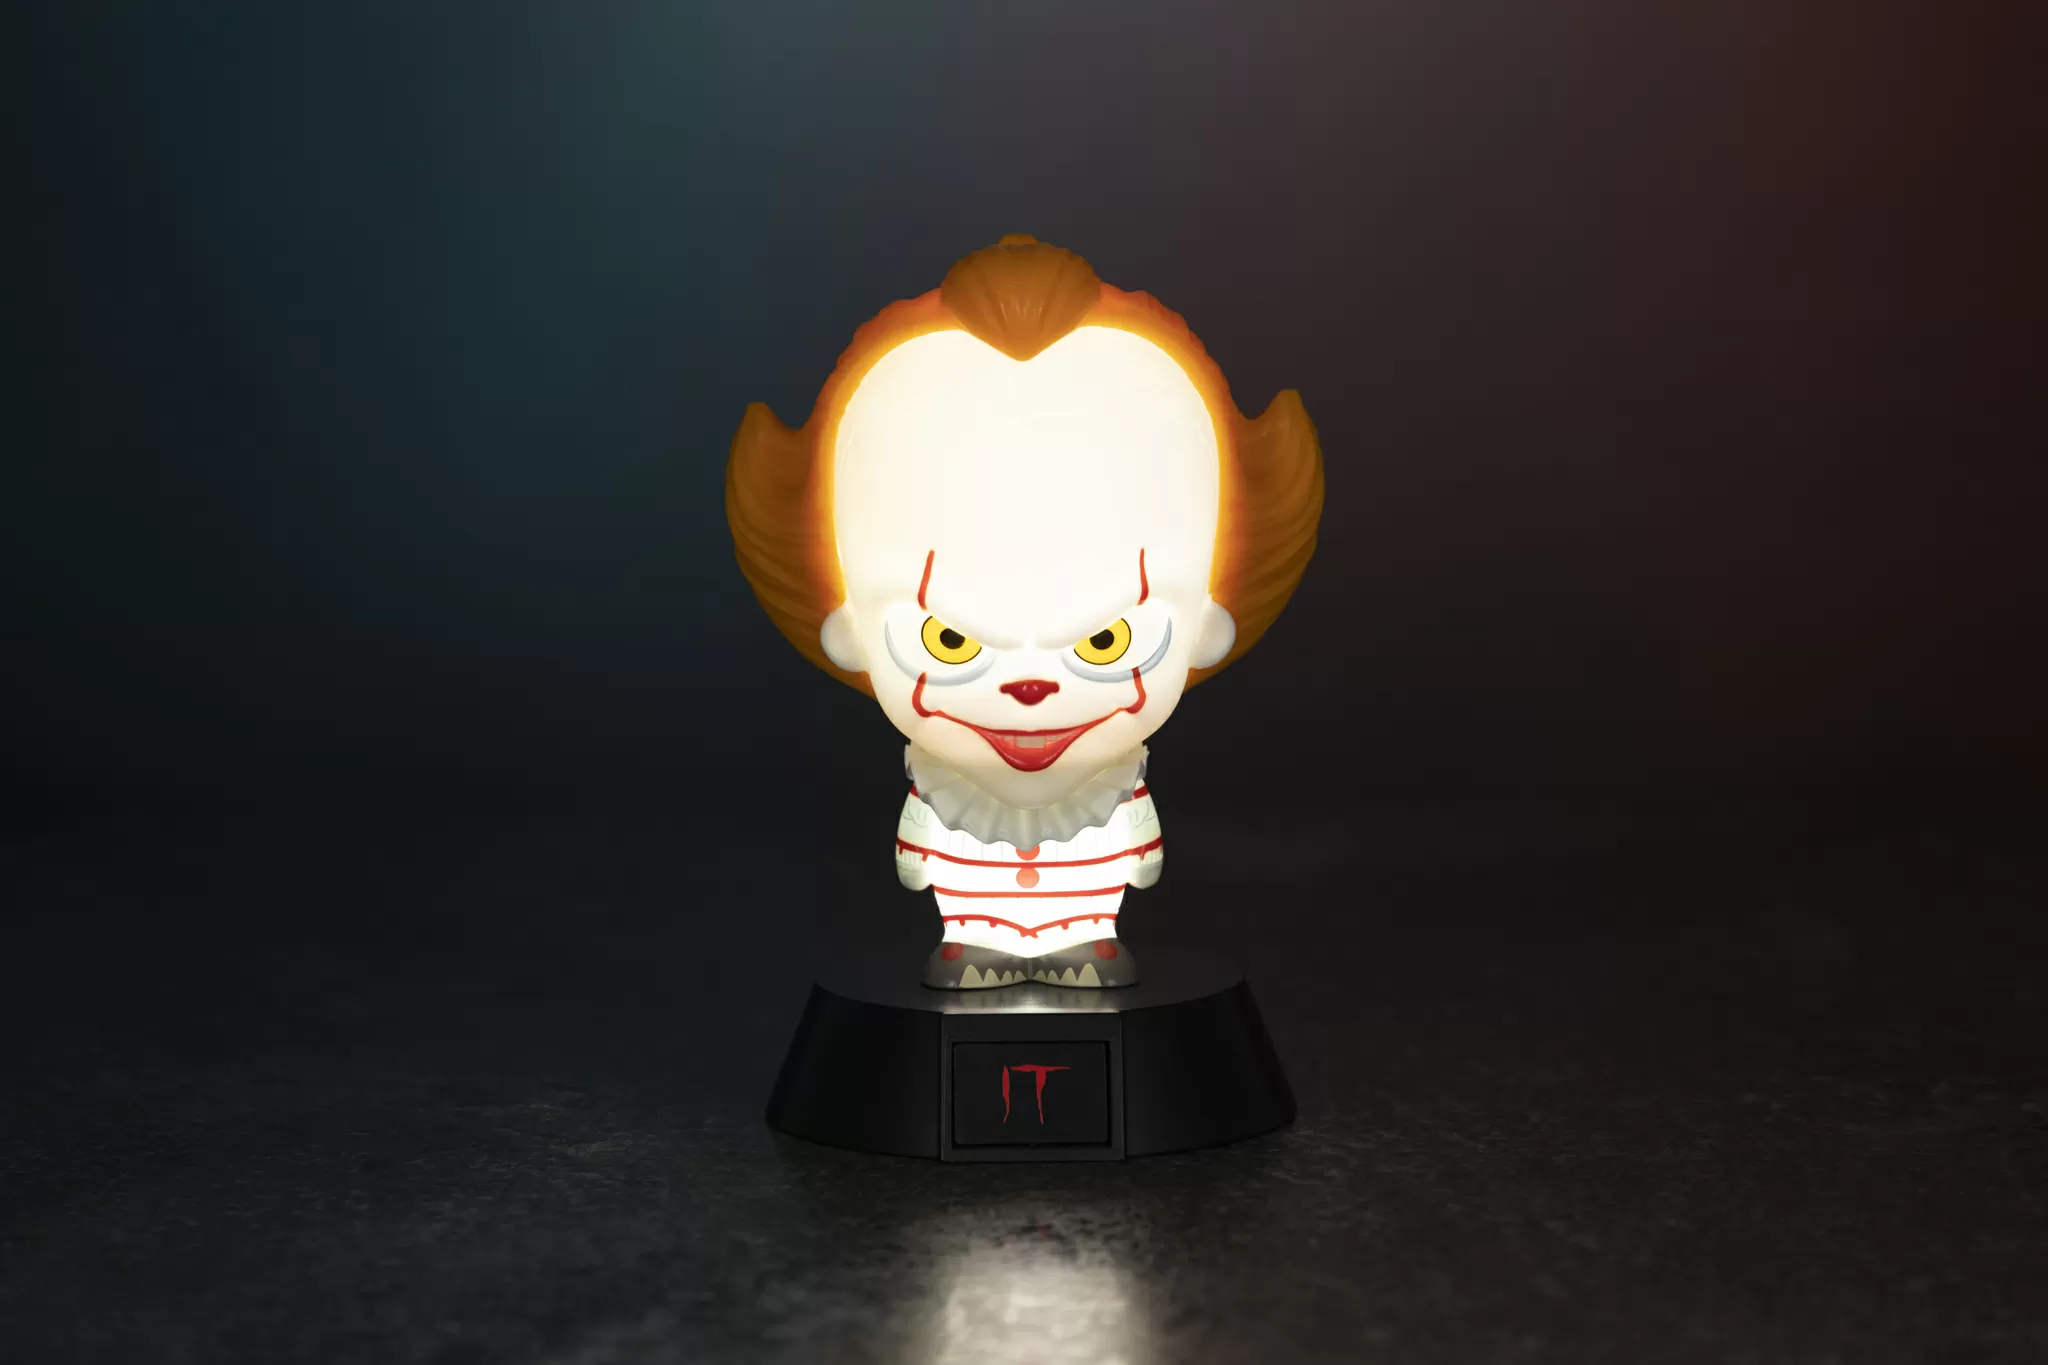 Светильник IT Pennywise Icon Light BDP PP5154IT